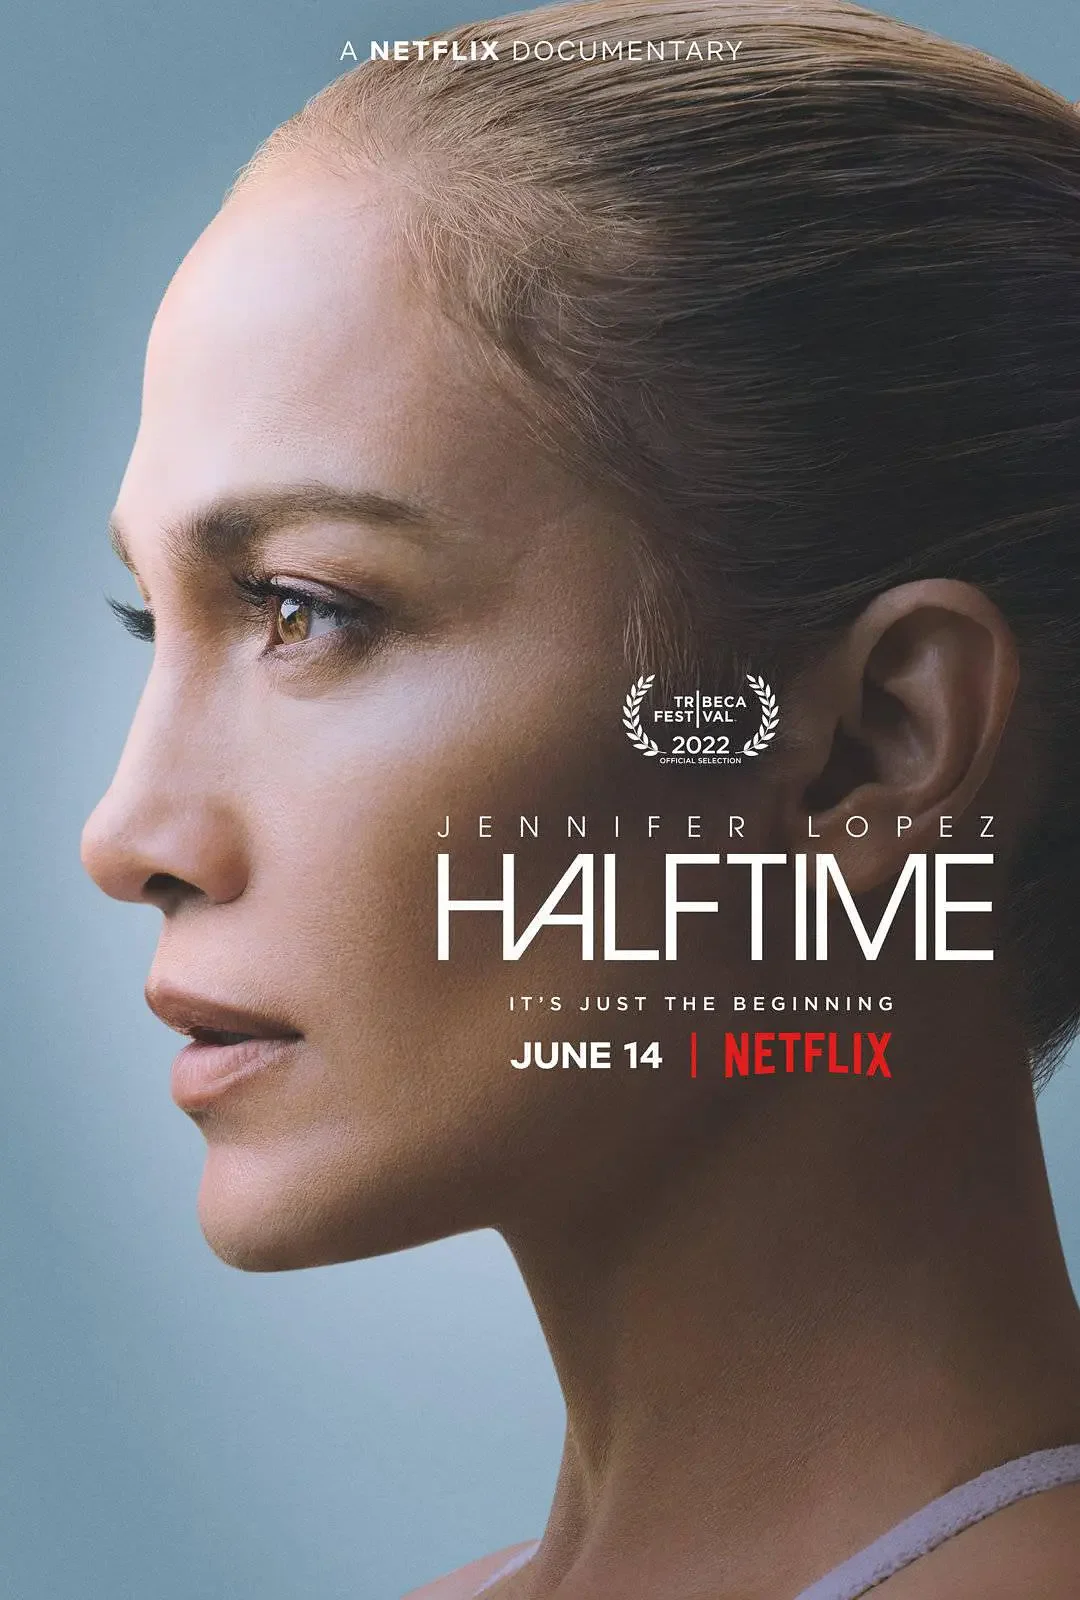 Documentary "Jennifer Lopez: Halftime" Releases Official Trailer, which will be available on Netflix on June 14